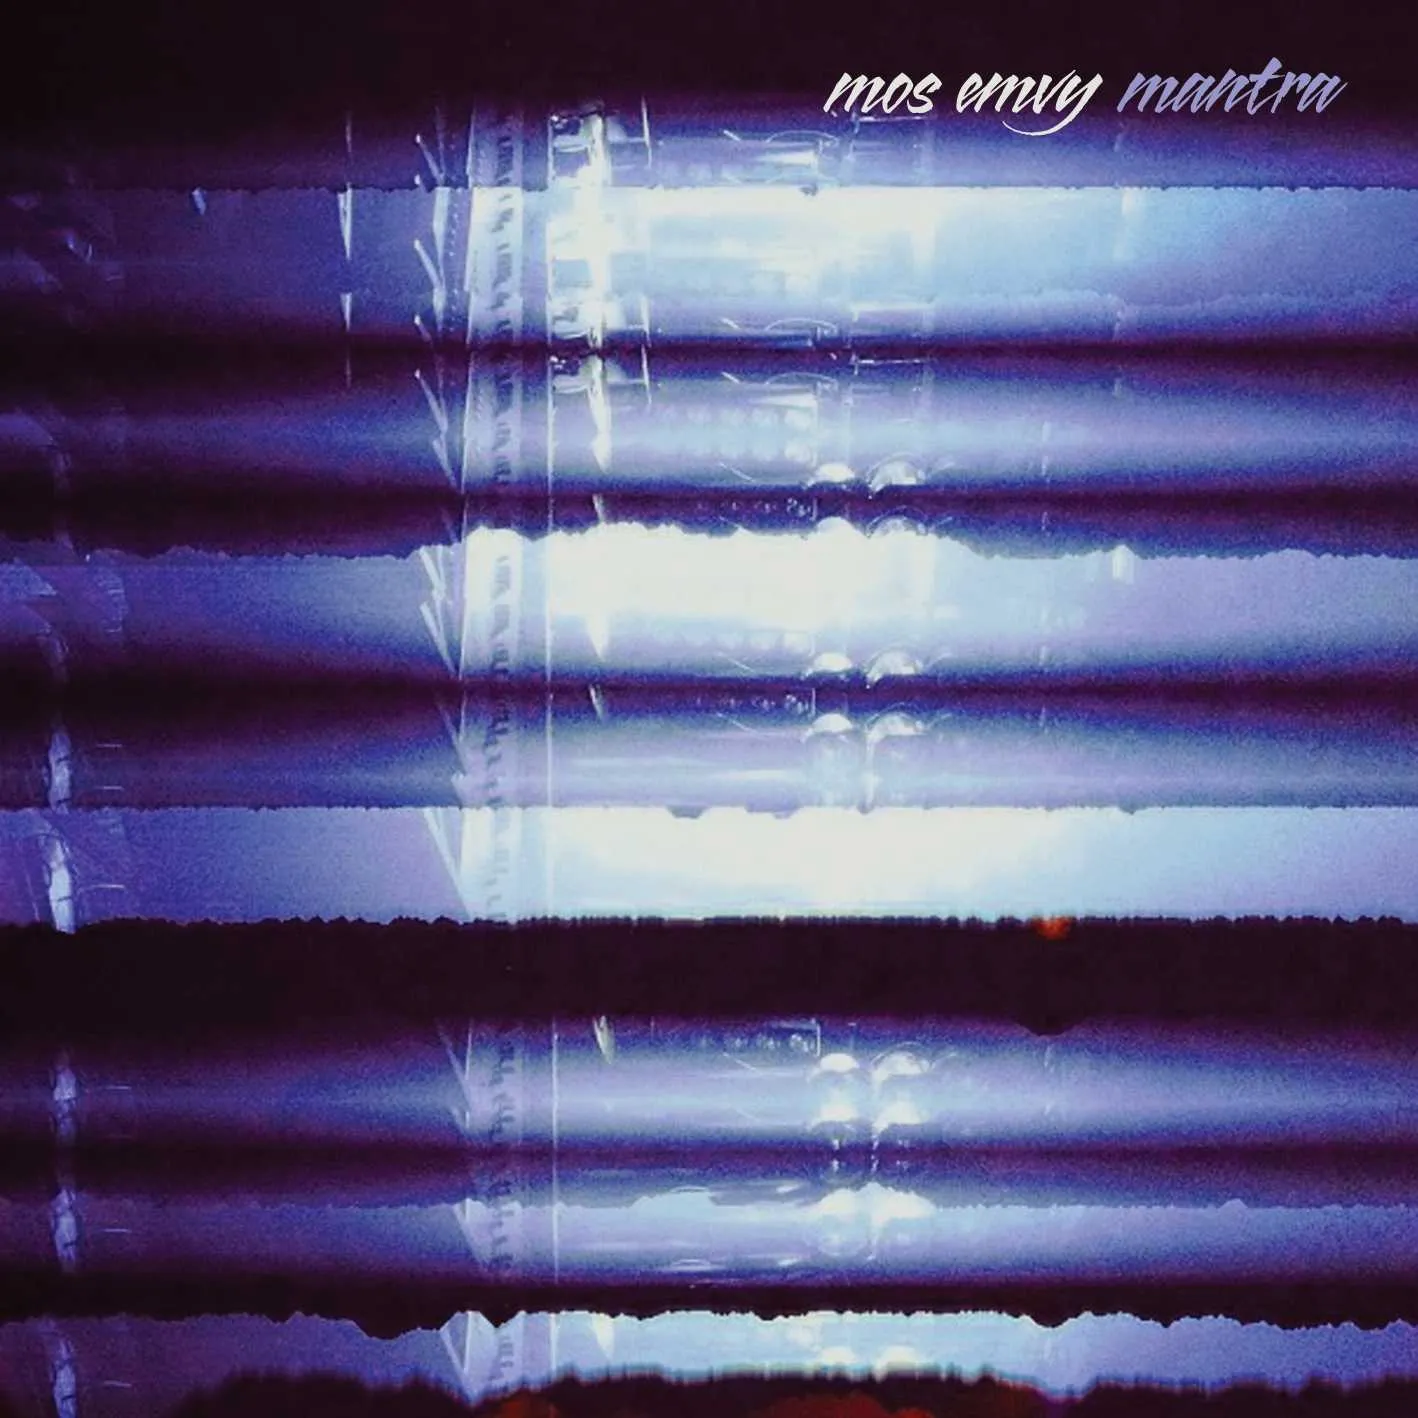 Album cover for “Mantra” by Mos Emvy